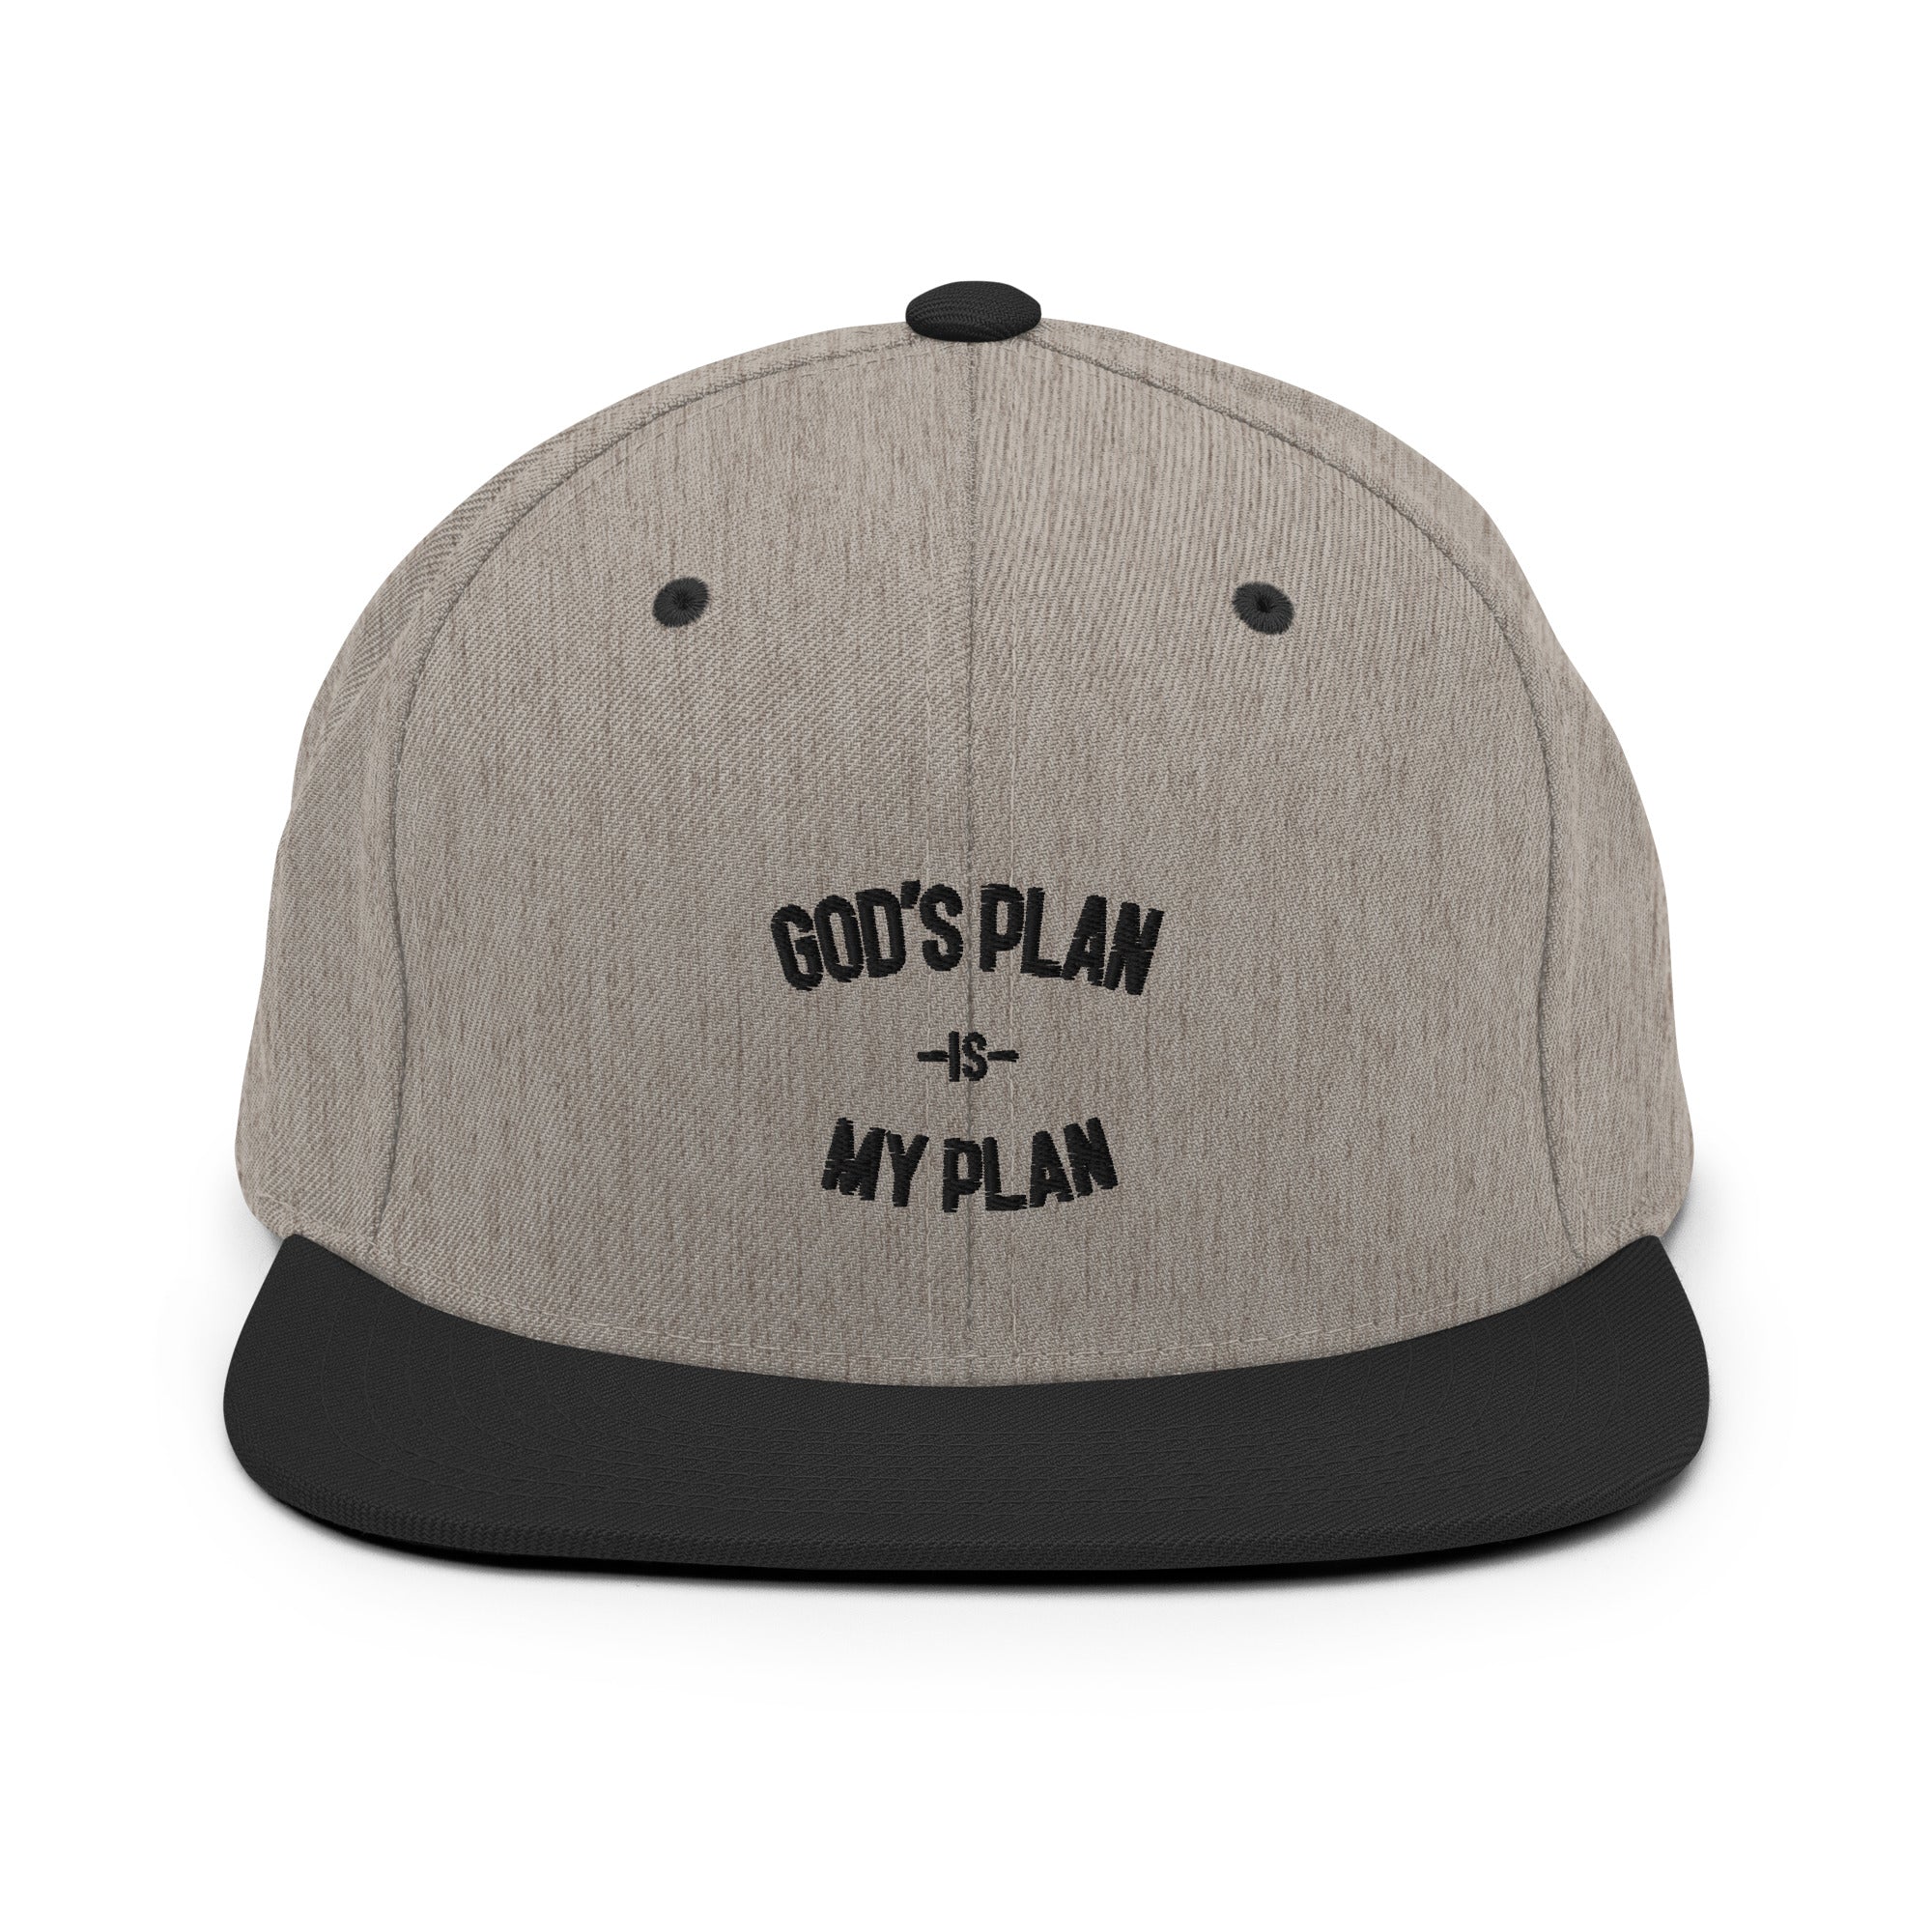 God's Plan My Plan Original Snapback Hat, Used By God, Used By God Clothing, Christian Apparel, Christian Hats, Christian T-Shirts, Christian Clothing, God Shirts, Christian Sweatshirts, God Clothing, Jesus Hoodie, Jesus Clothes, God Is Dope, Art Of Homage, Red Letter Clothing, Elevated Faith, Active Faith Sports, Beacon Threads, God The Father Apparel